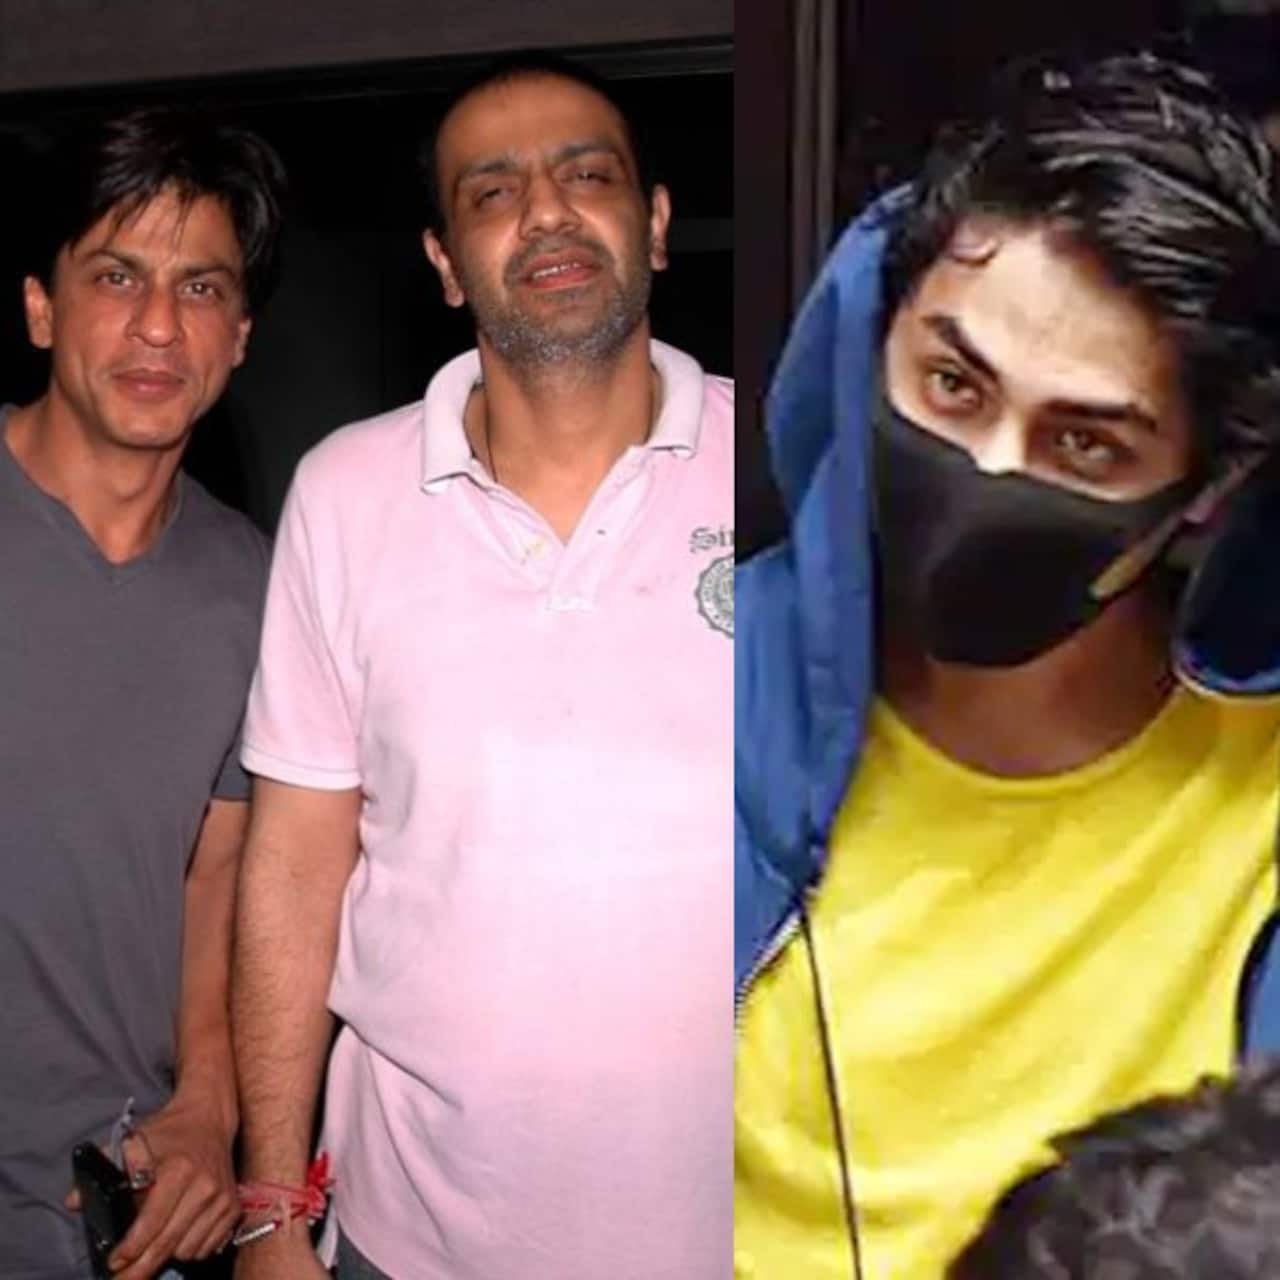 Aryan Khan case: Chunky Pandey’s brother Chikki summoned by Mumbai Police after alleged extortion levelled by the NCB